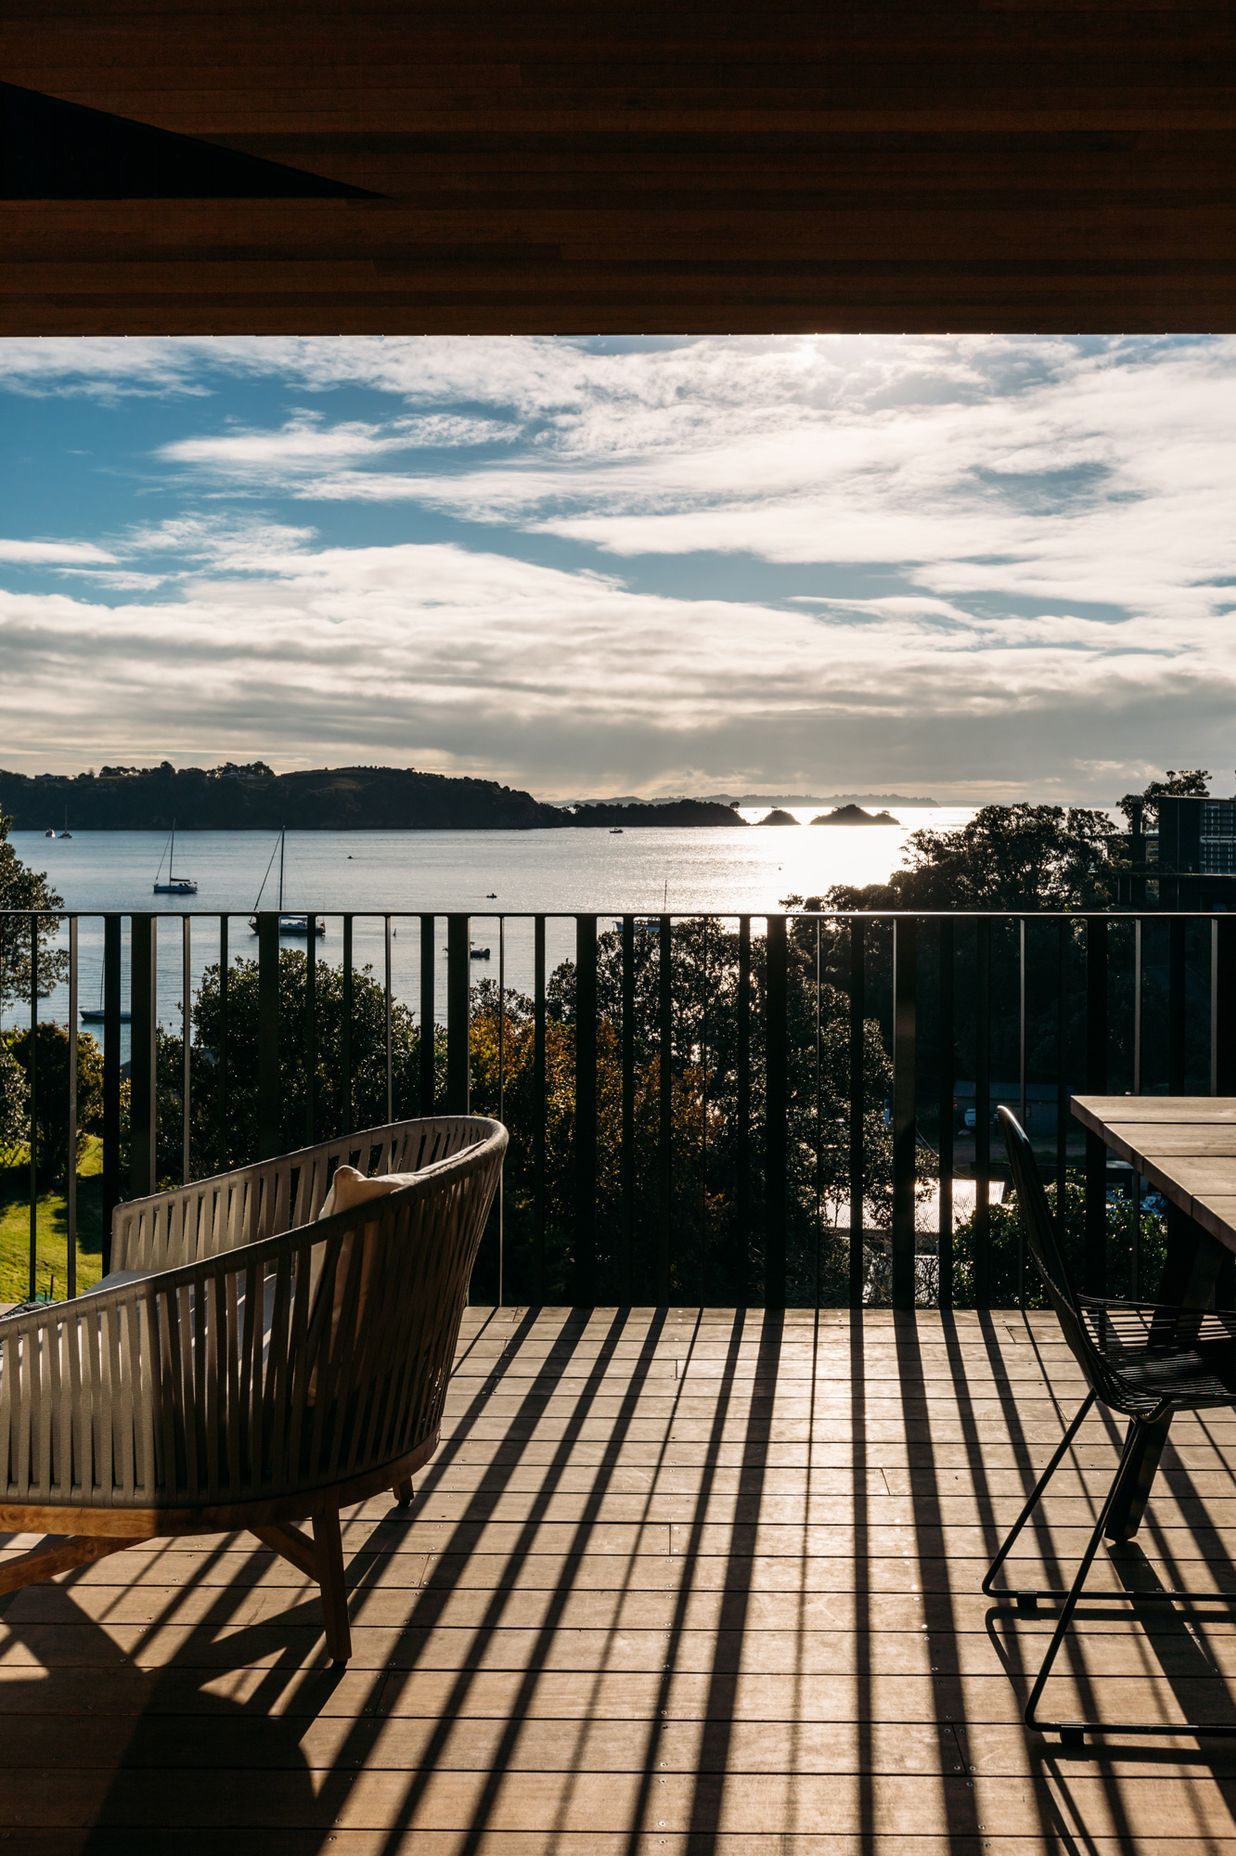 The north-west facing deck is bathed in afternoon light, the perfect vantage point for taking in the view.